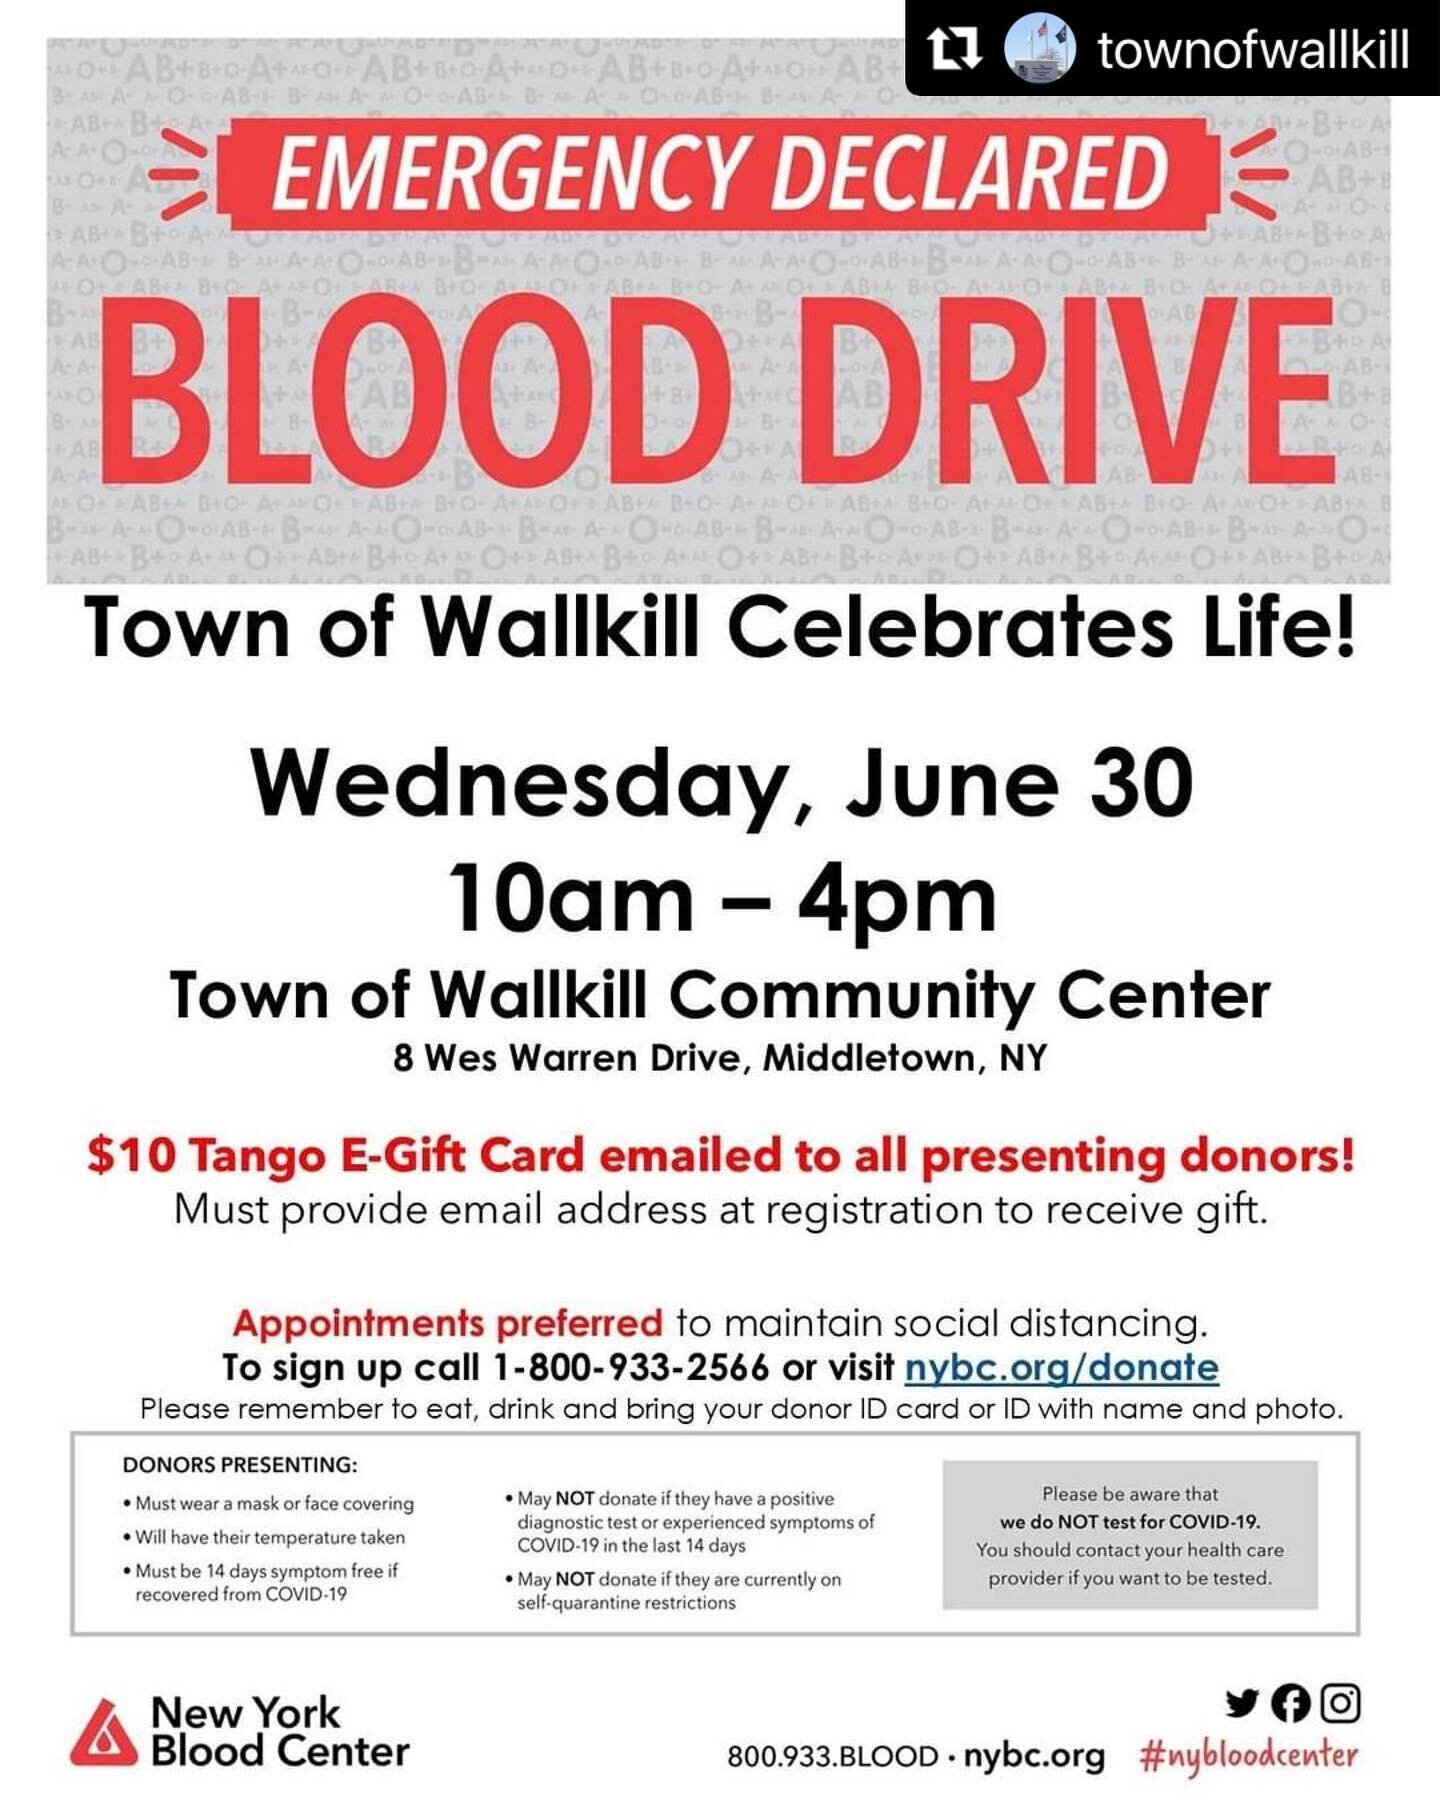 #Repost @townofwallkill with @make_repost
・・・
Annual Blood Drive in honor of our Town Clerk, Louisa Ingrassia's Birthday tomorrow @ the Community Center!